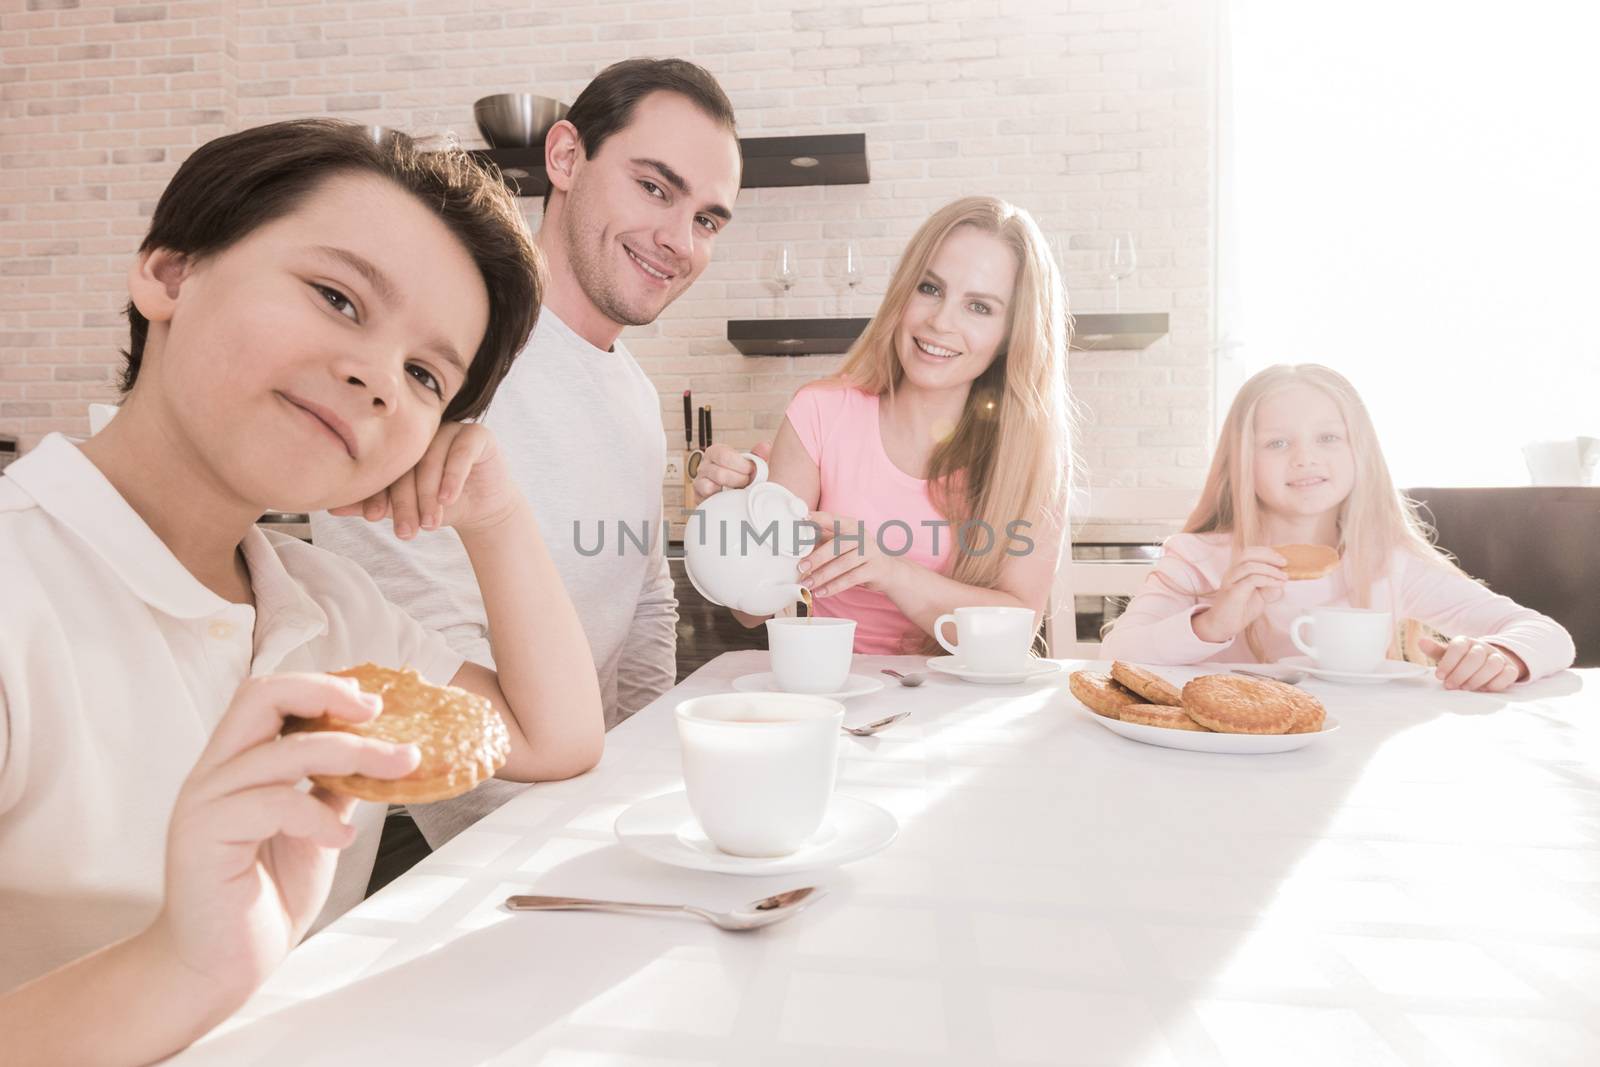 Happy family with children having breakfast at home